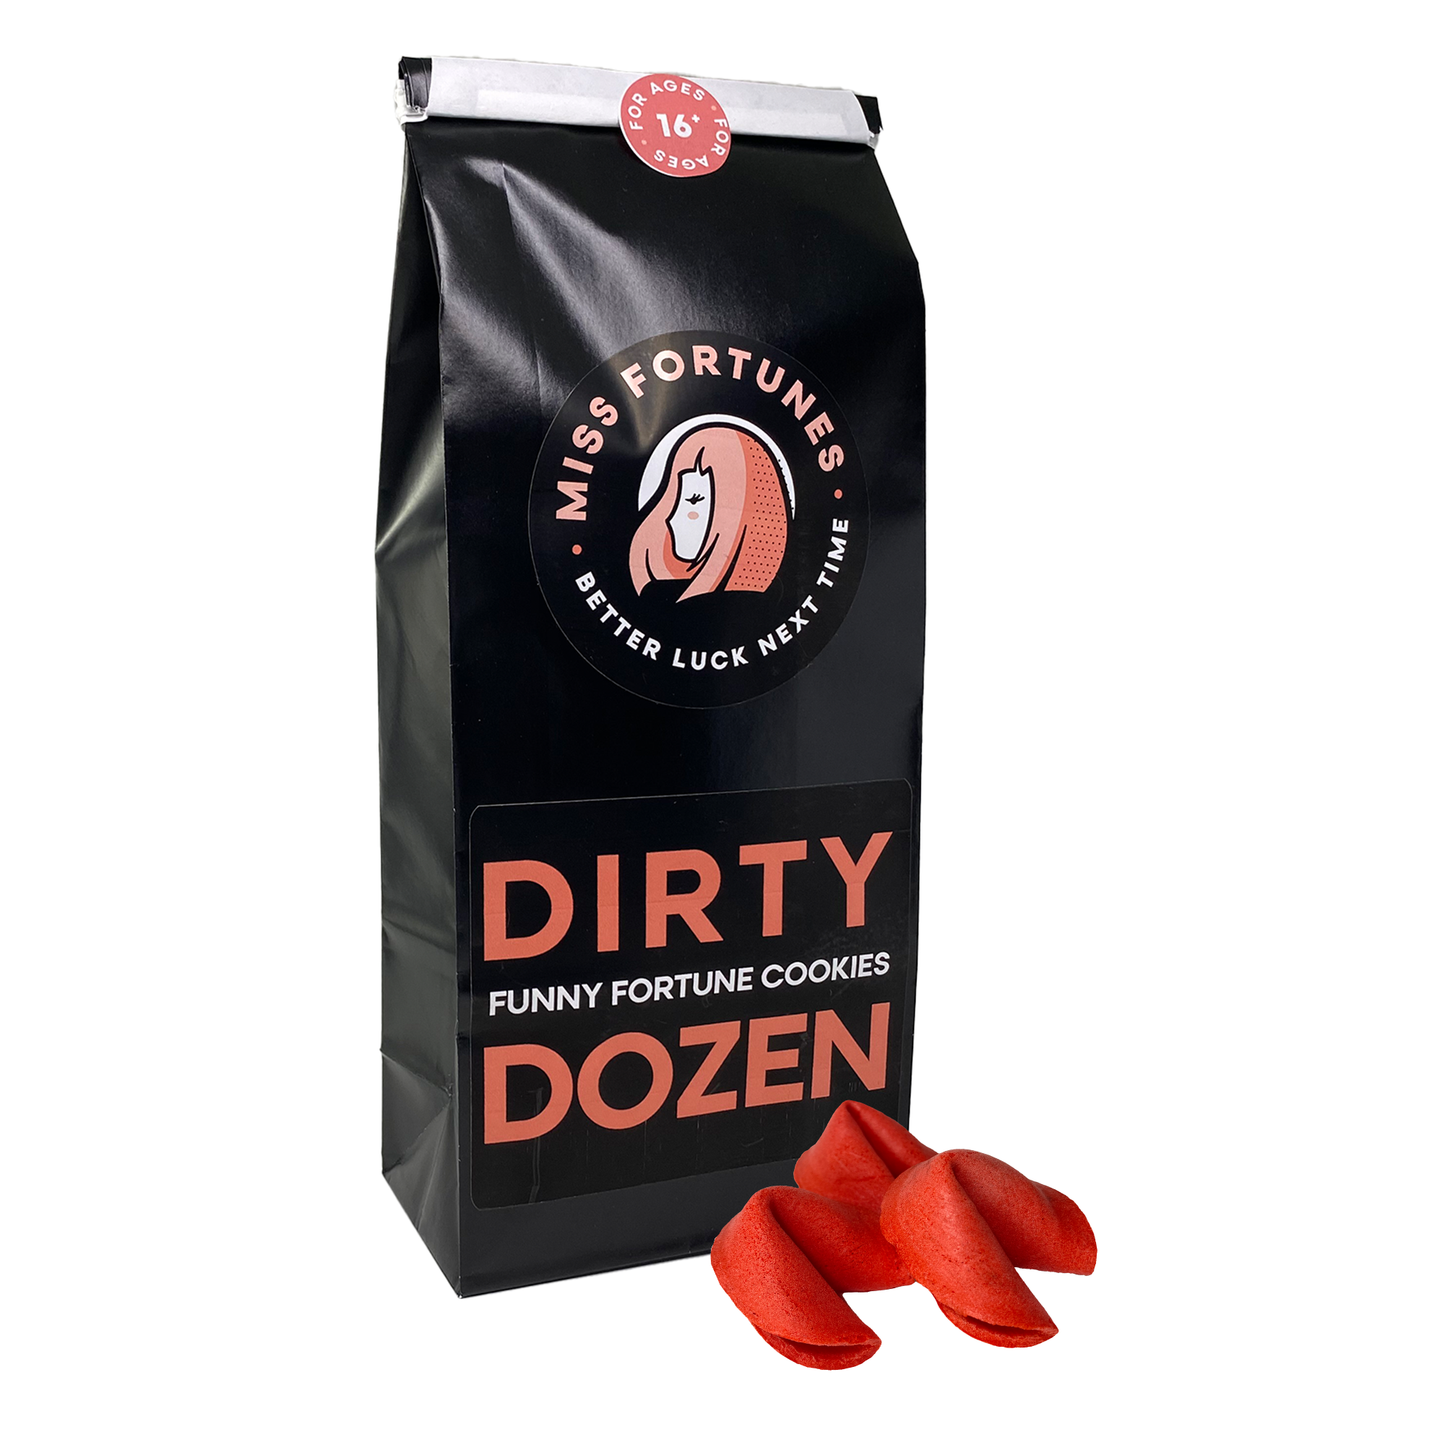 The Dirty Dozen - Show Off Your Questionable Taste!